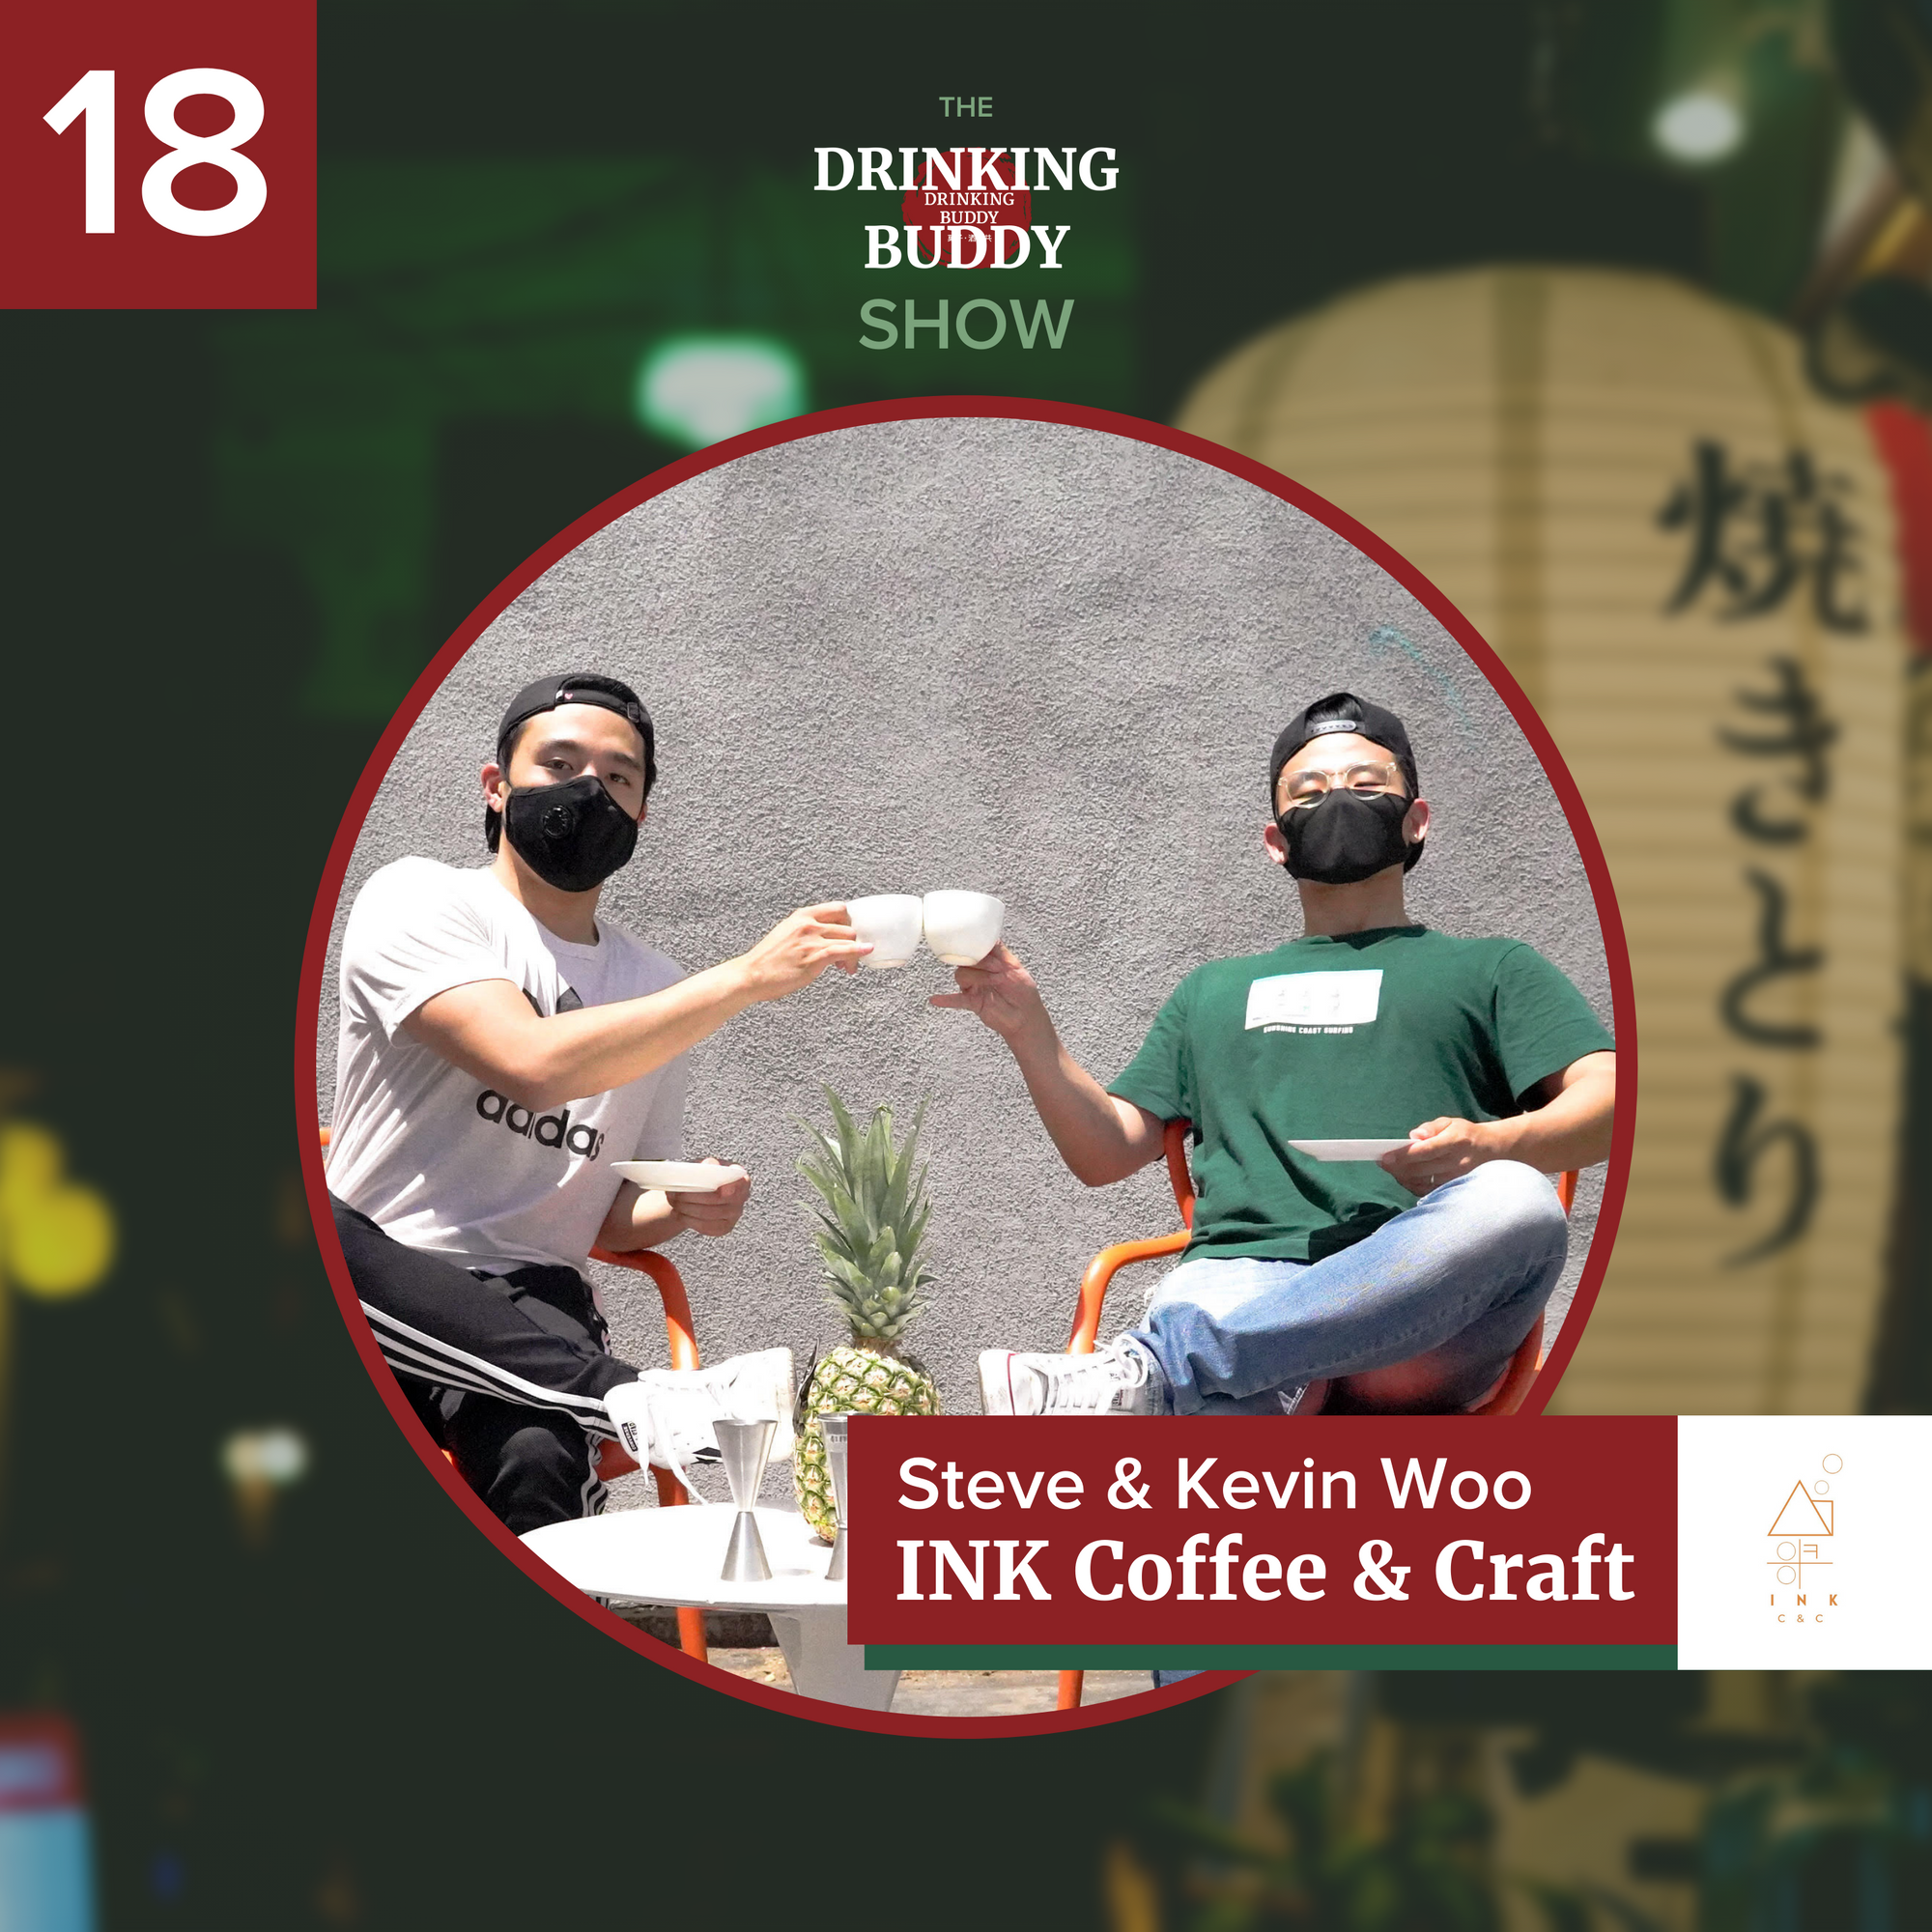 The Drinking Buddy Show Episode 18: Steve & Kevin Woo of Ink Coffee & Craft